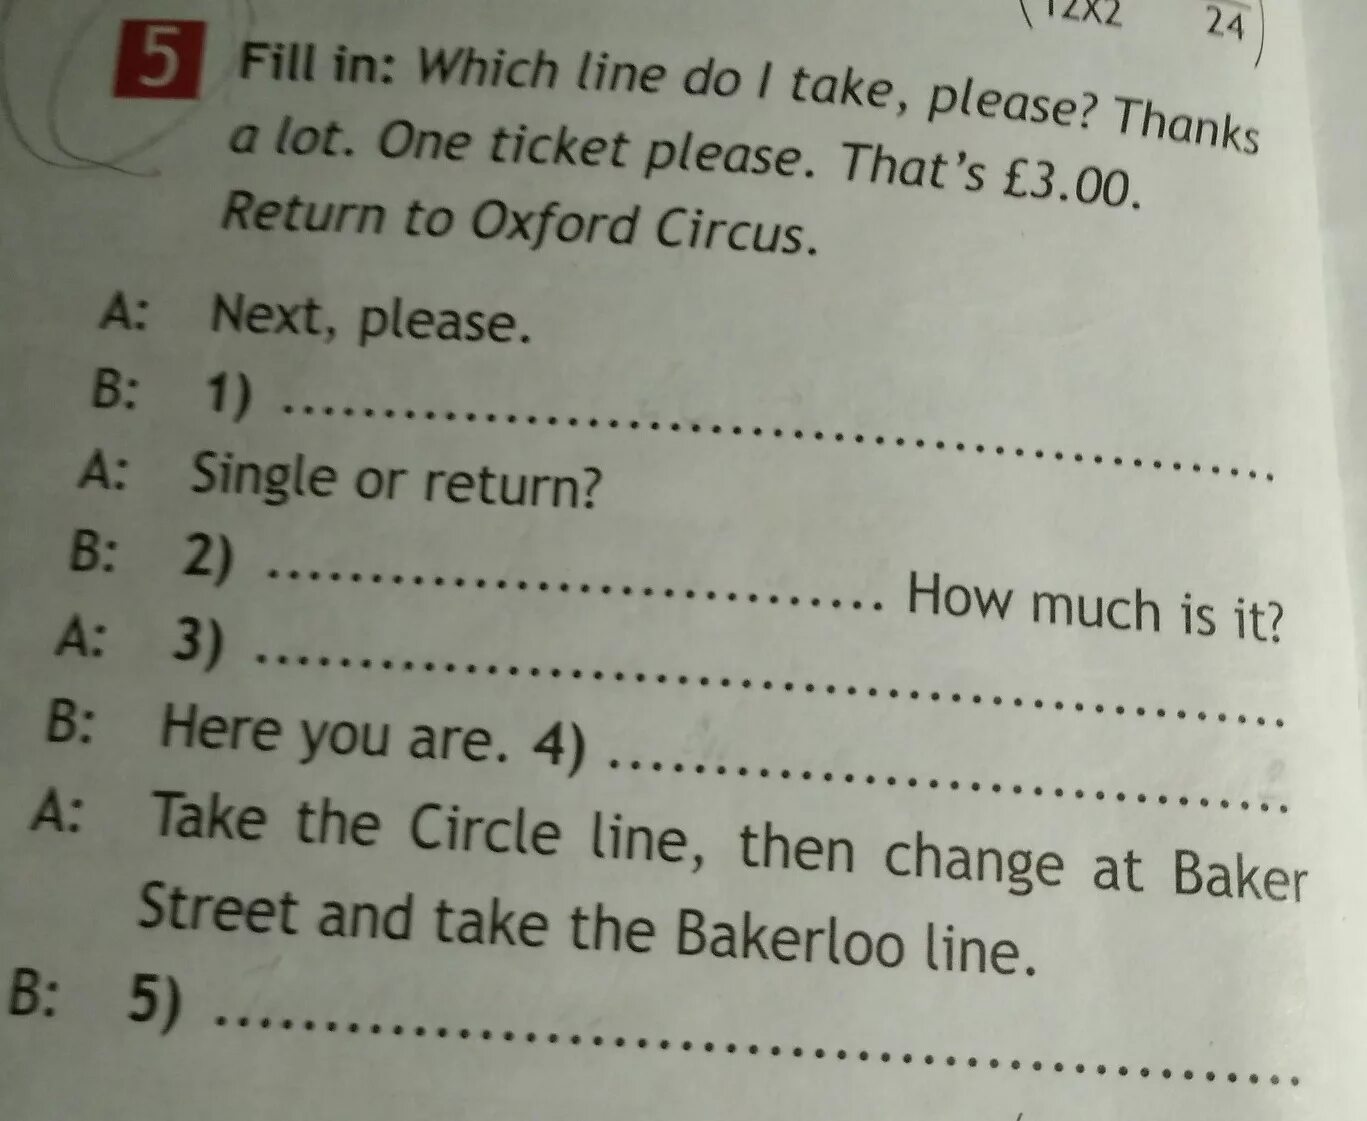 Complete the Dialogue use which line do i take please. Complete the Dialogue use which line do take please thanks a lot one ticket please that's£ 3 00 Return to Oxford Circus. Thanks a lot. Nest please two tickets please как читается.